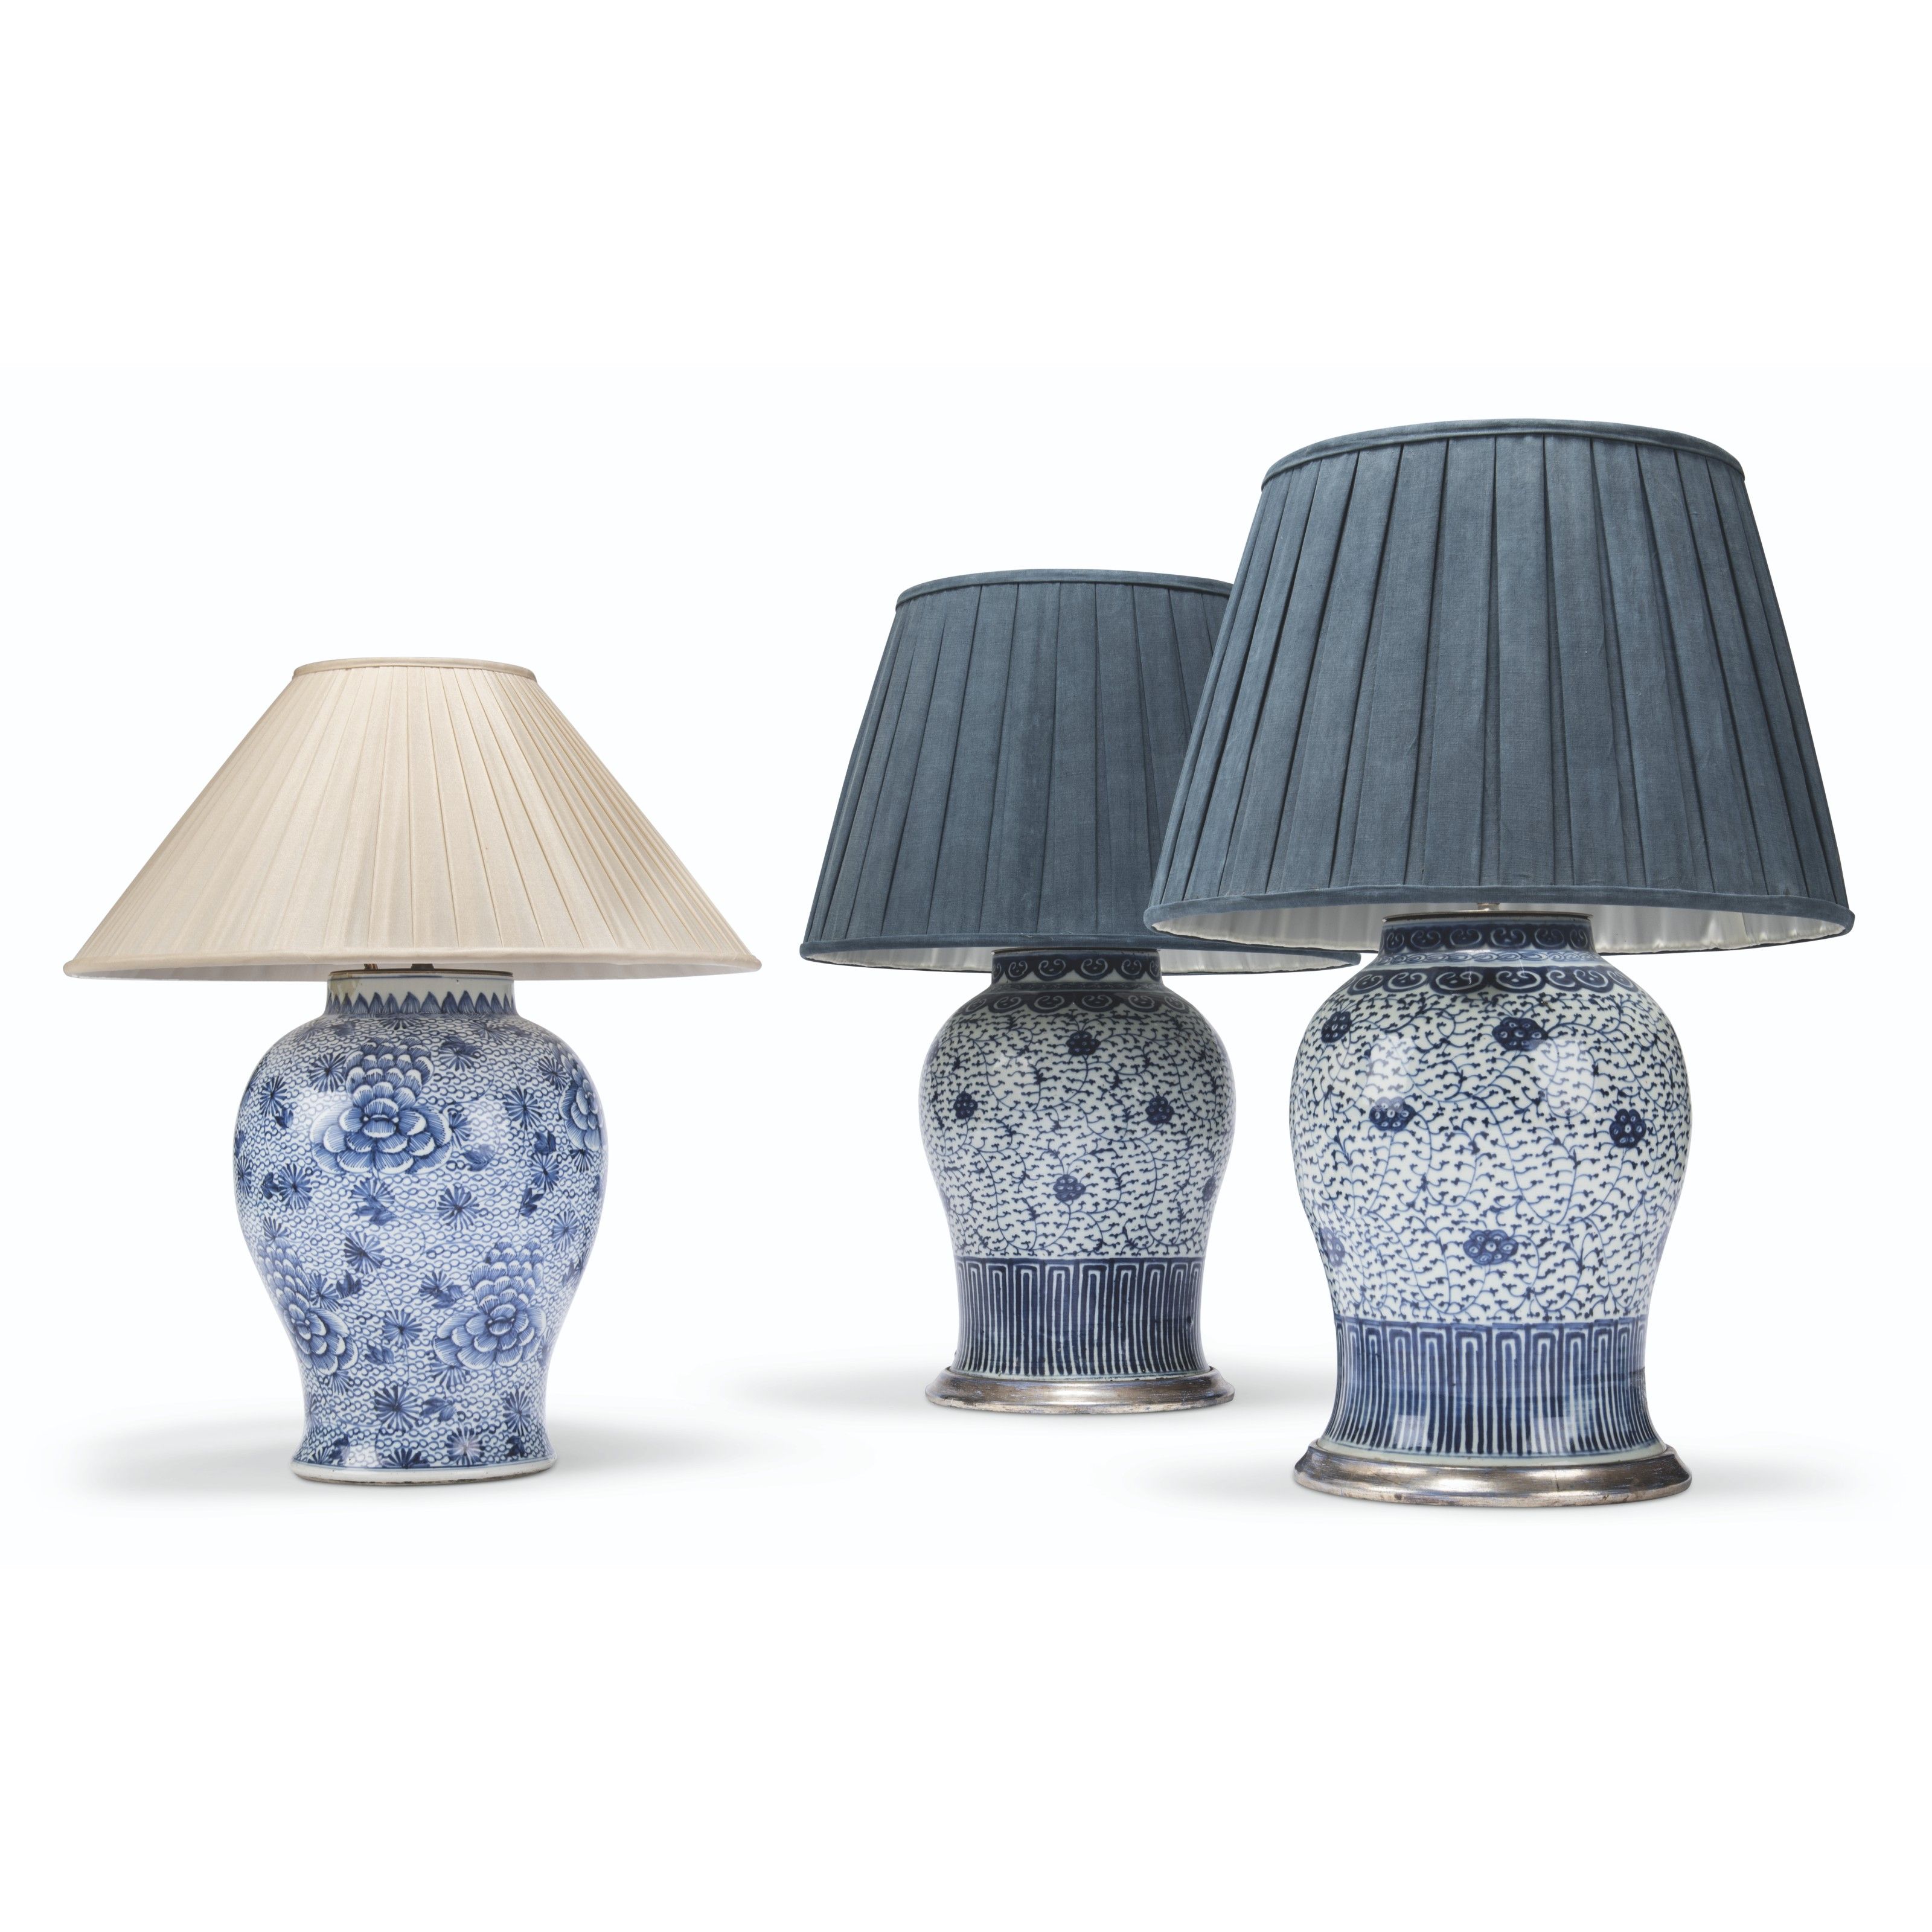 THREE CHINESE BLUE AND WHITE BALUSTER VASE TABLE LAMPS